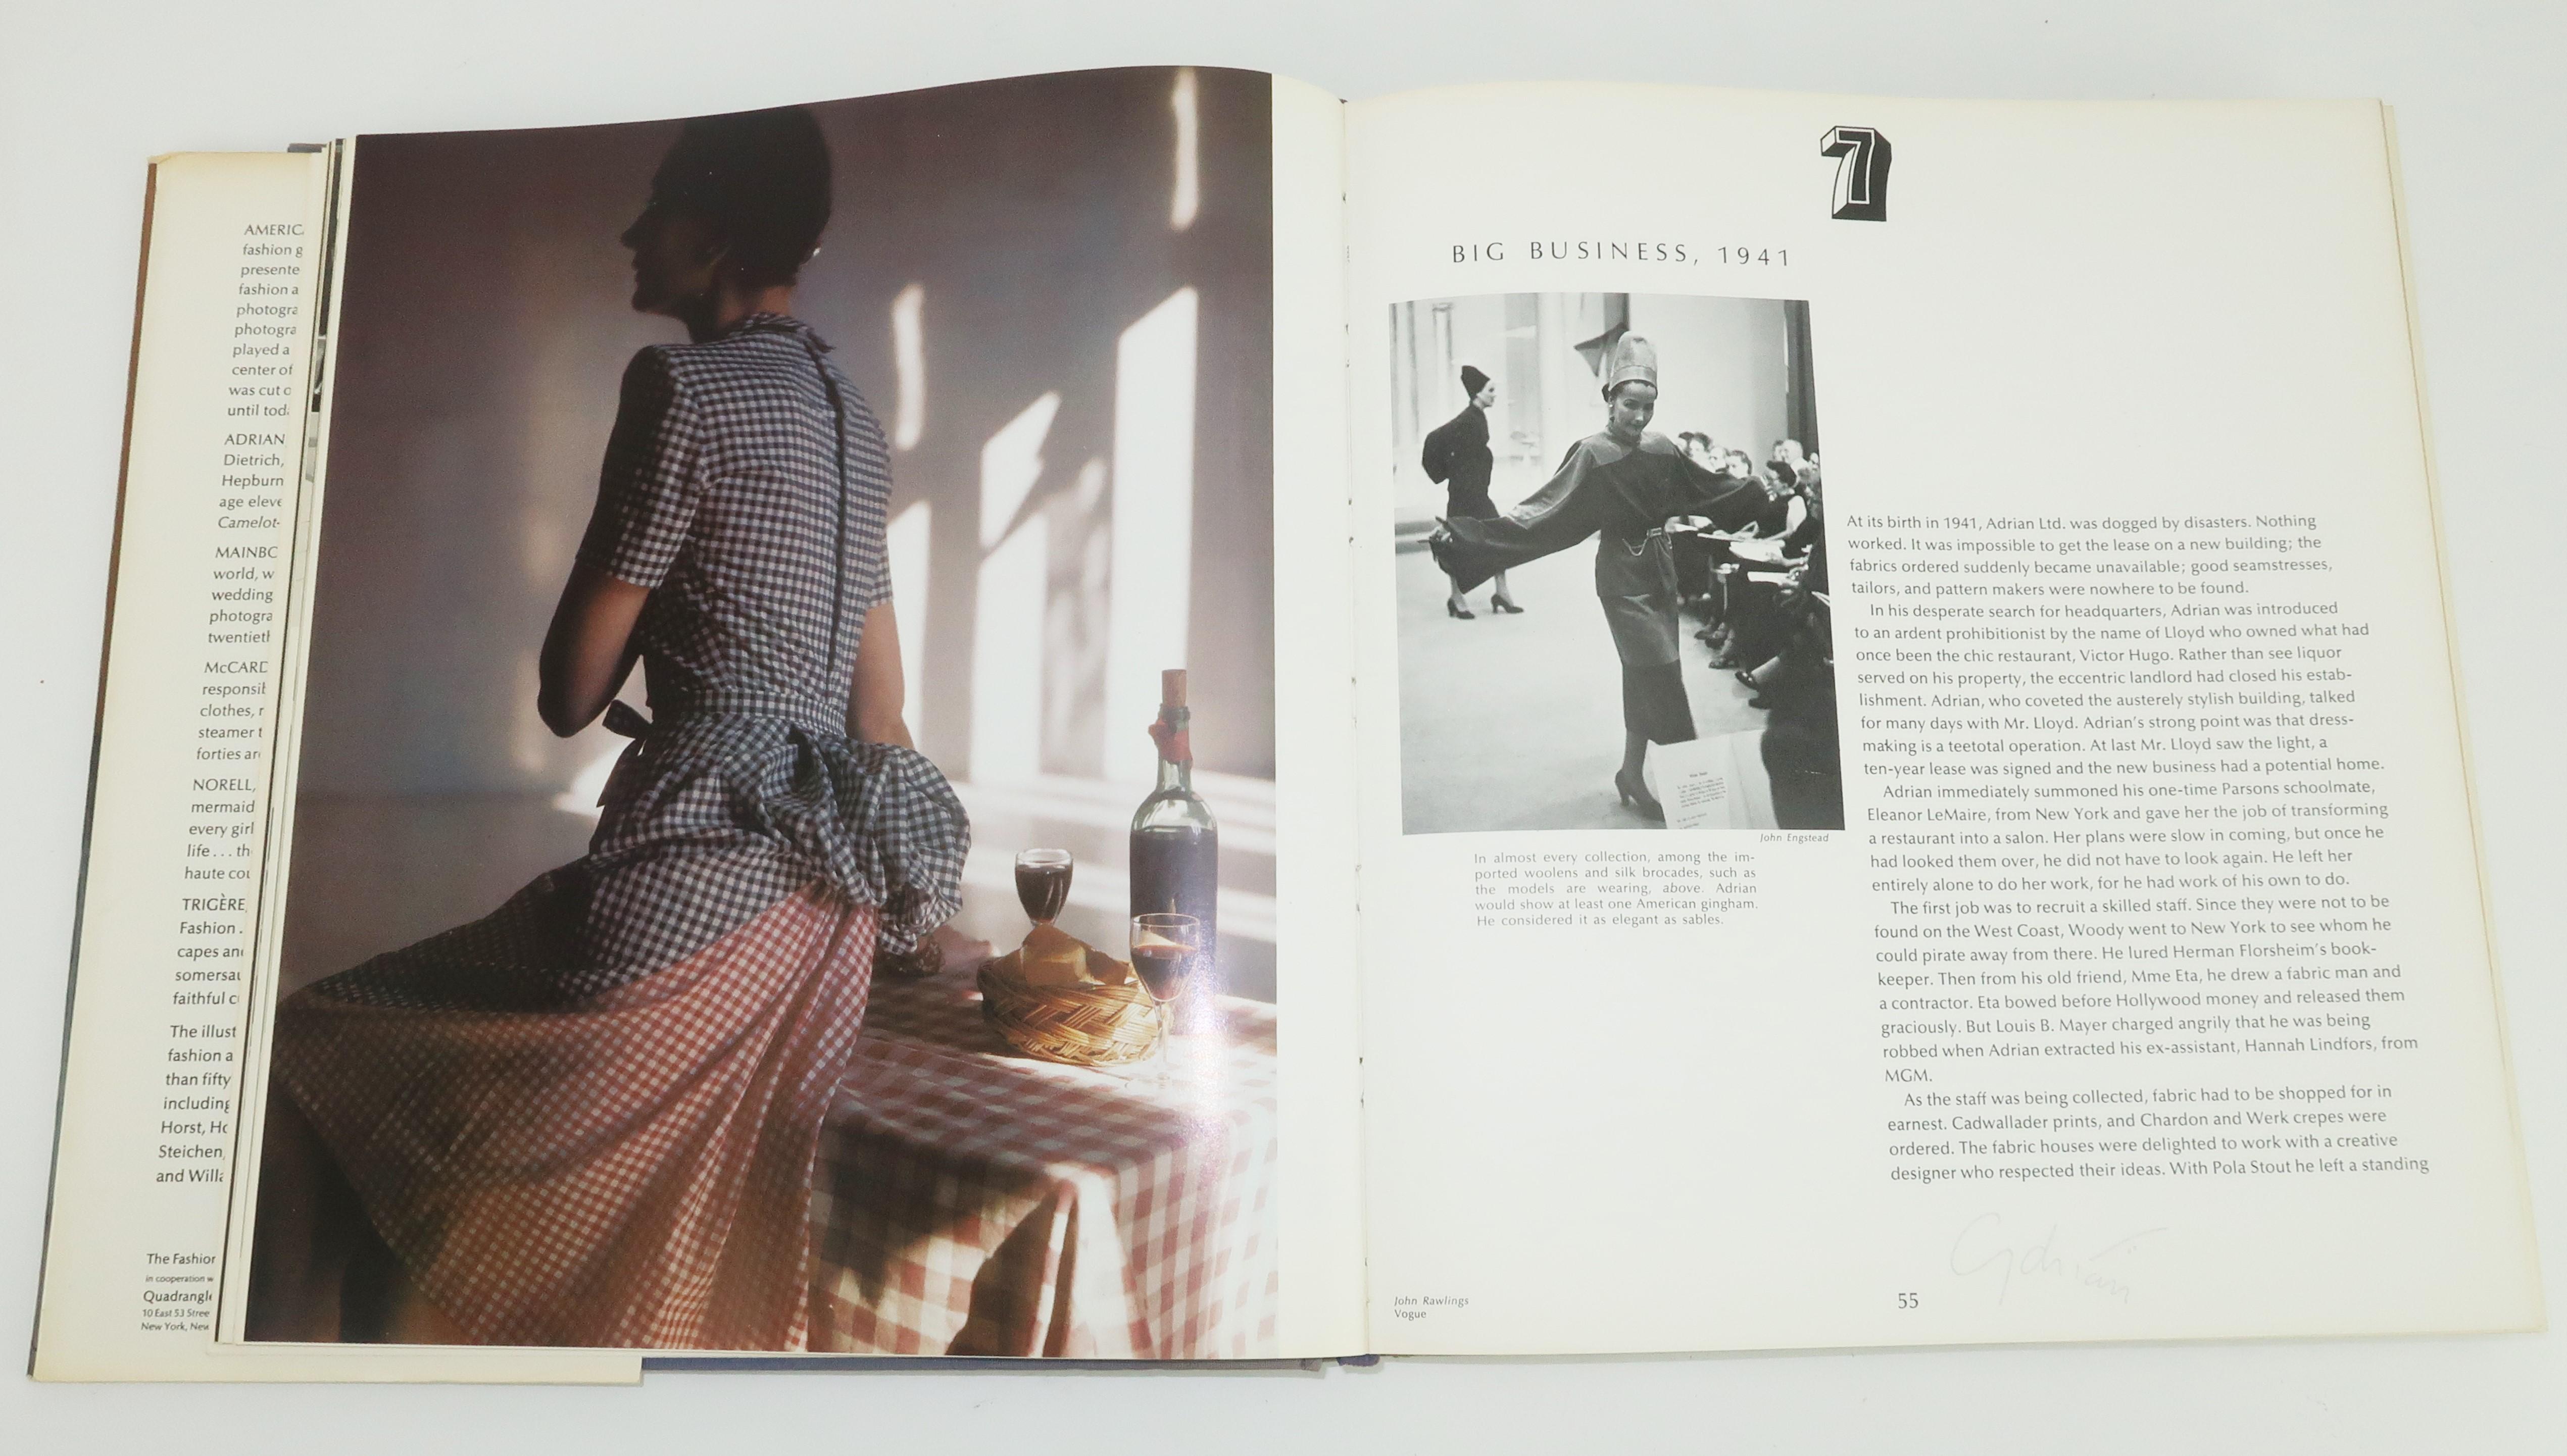 Gray American Fashion Book Featuring Adrian, Mainbocher, McCardell, Norell, Trigere